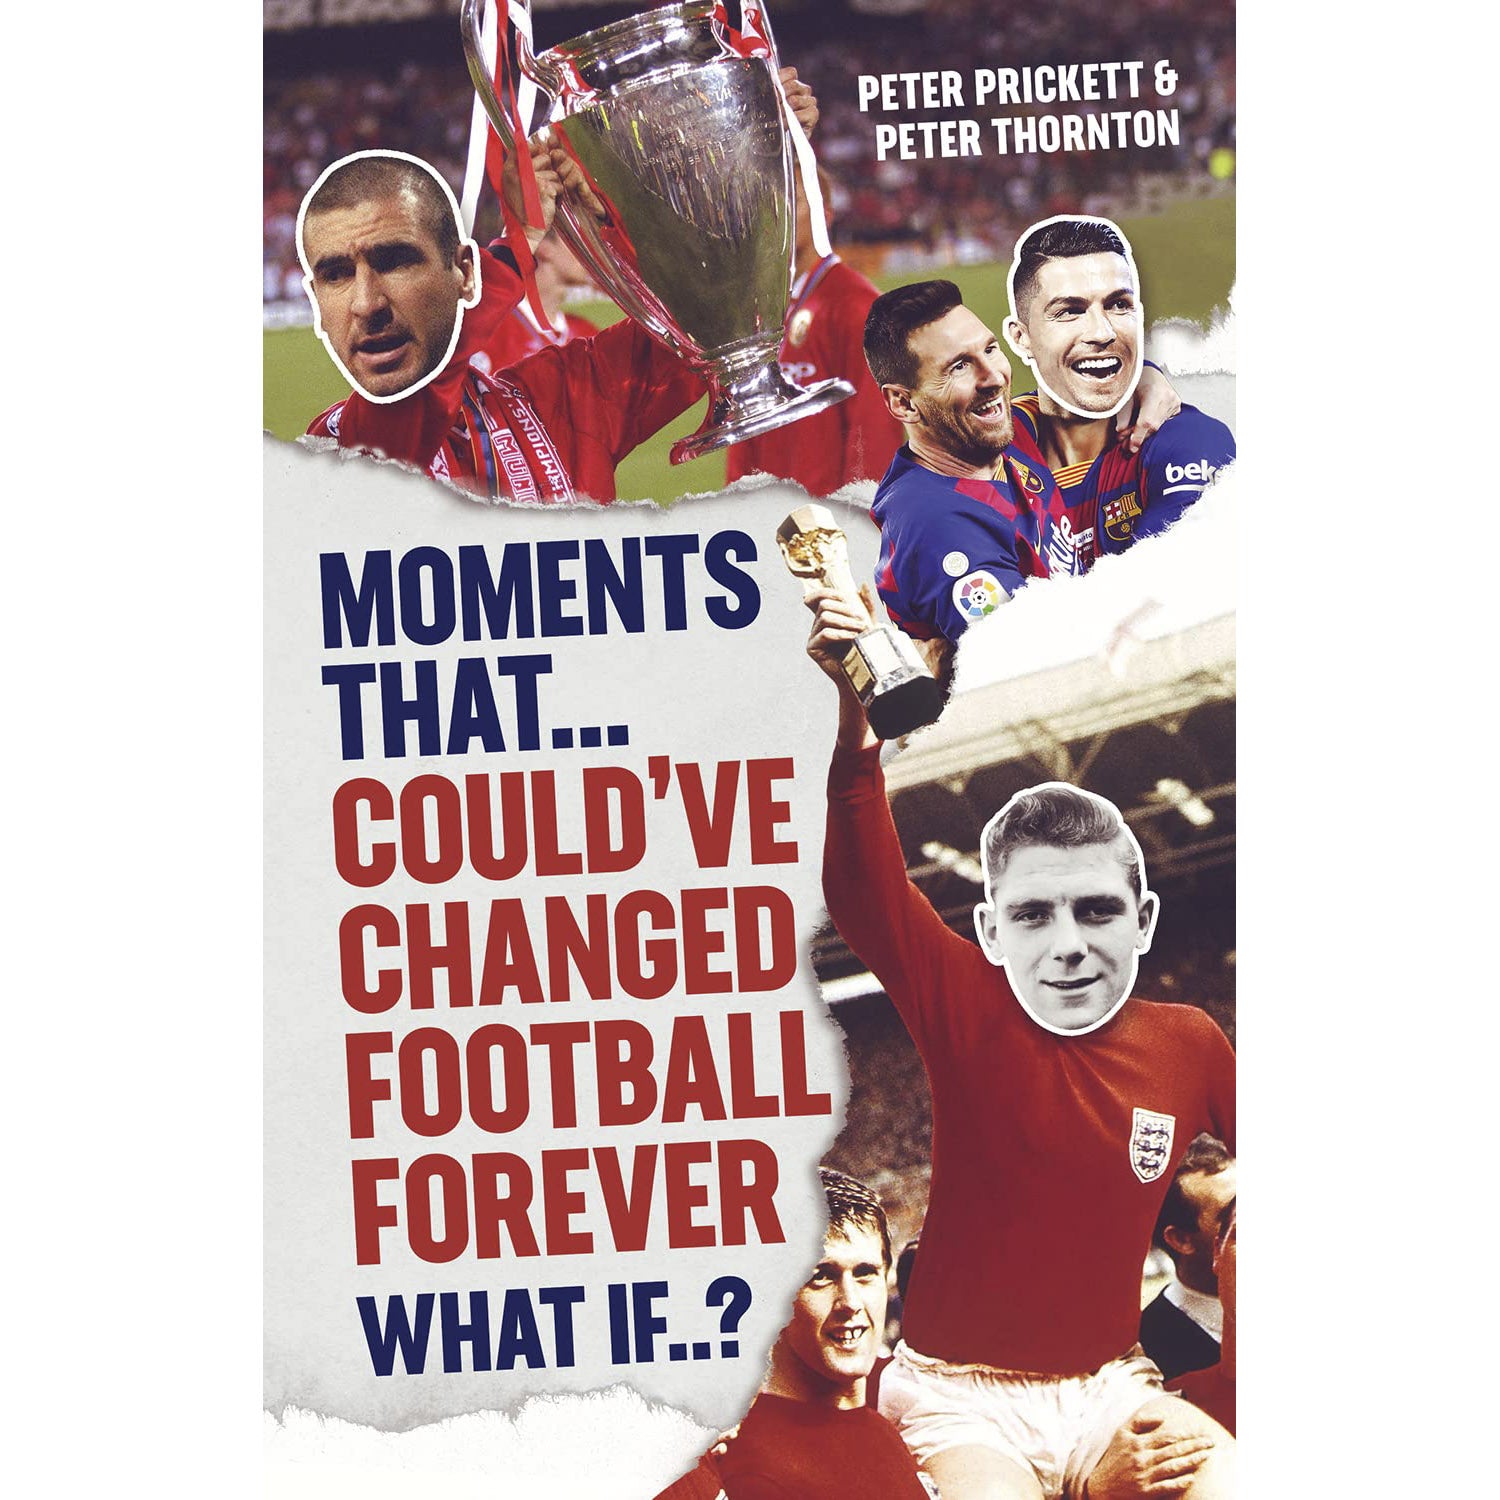 Moments That Could've Changed Football Forever – What if…?